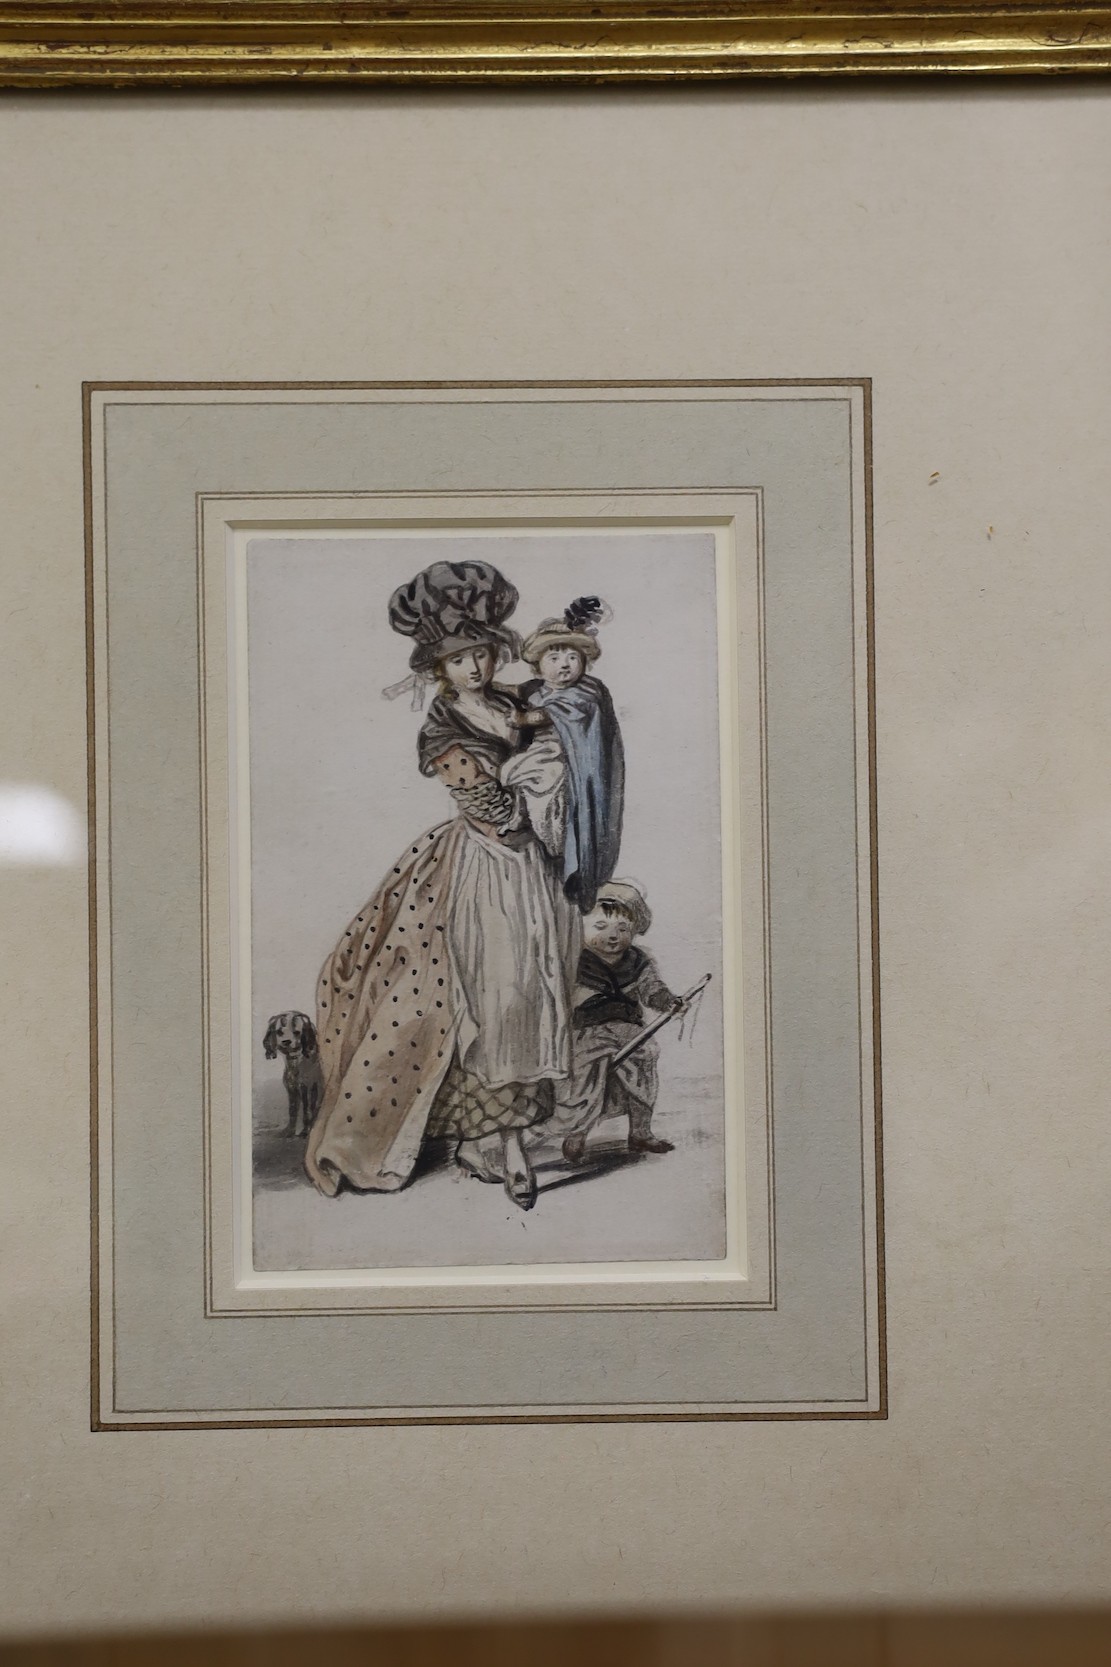 John Collet (1725-1780), two watercolours, Studies of 18th century ladies in elaborate outfits, 12 x 8cm